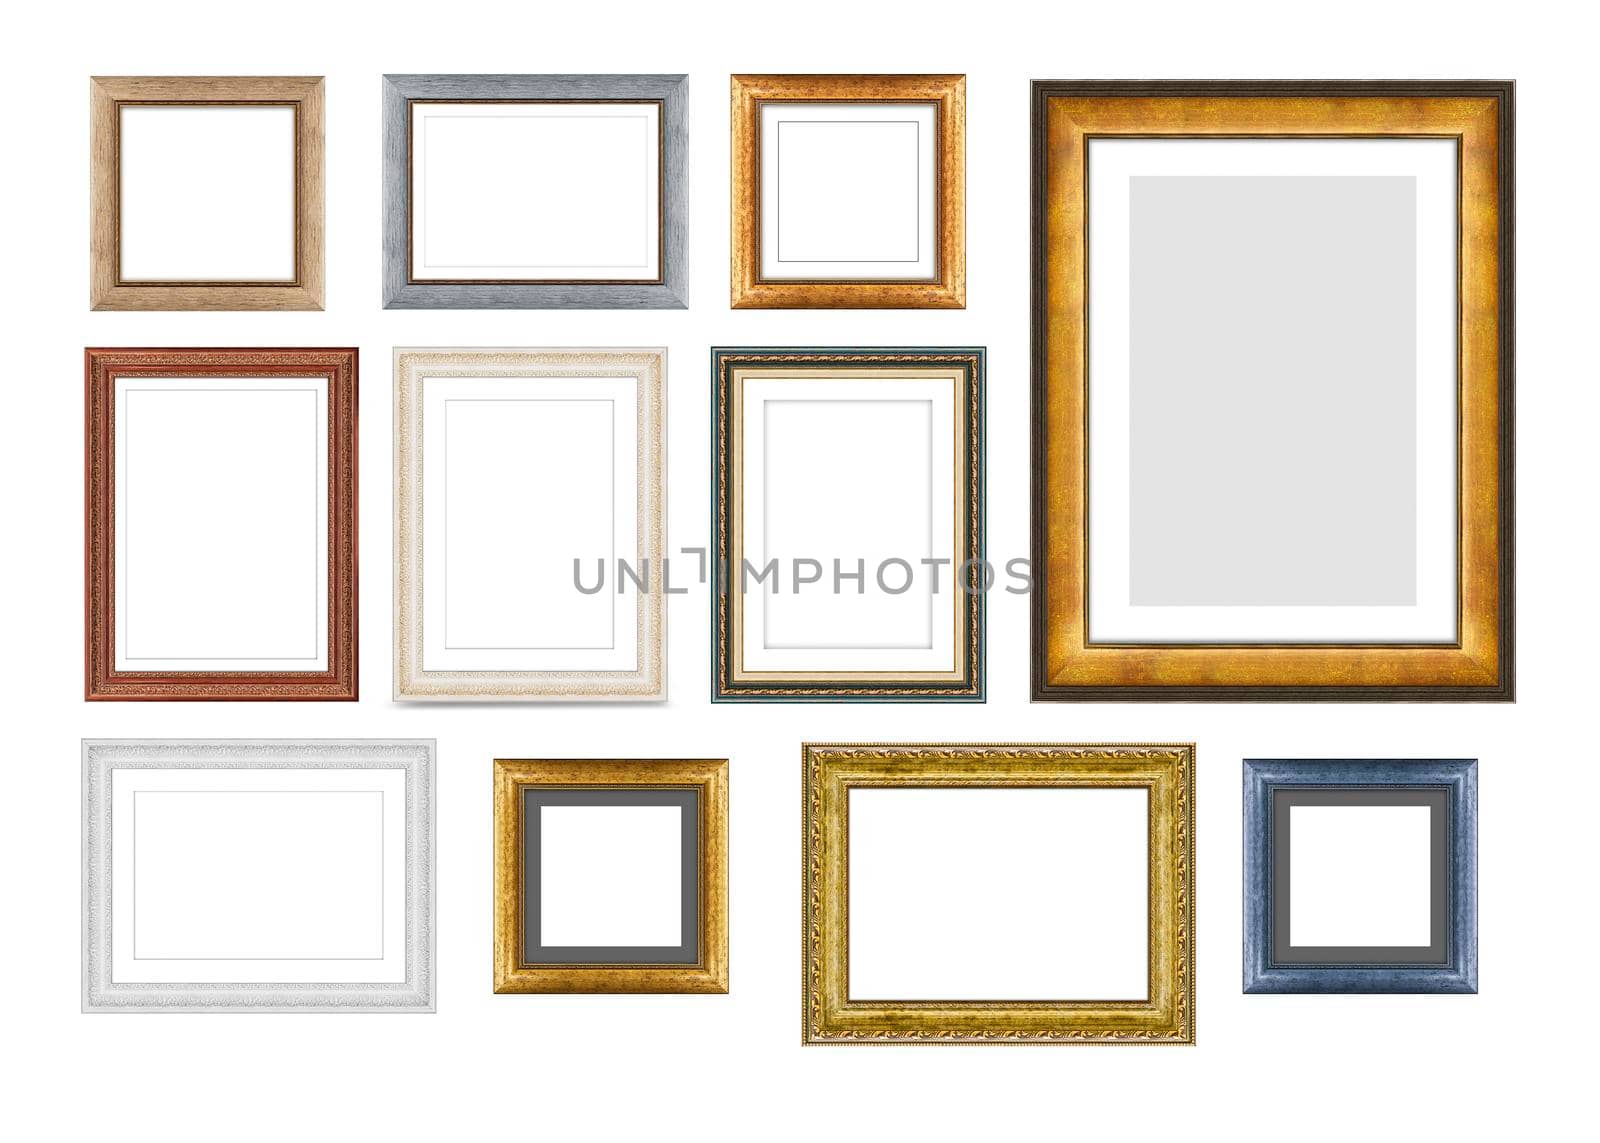 Set of vintage wooden frames for pictures or photos, frames for a mirror isolated on white background. With clipping path